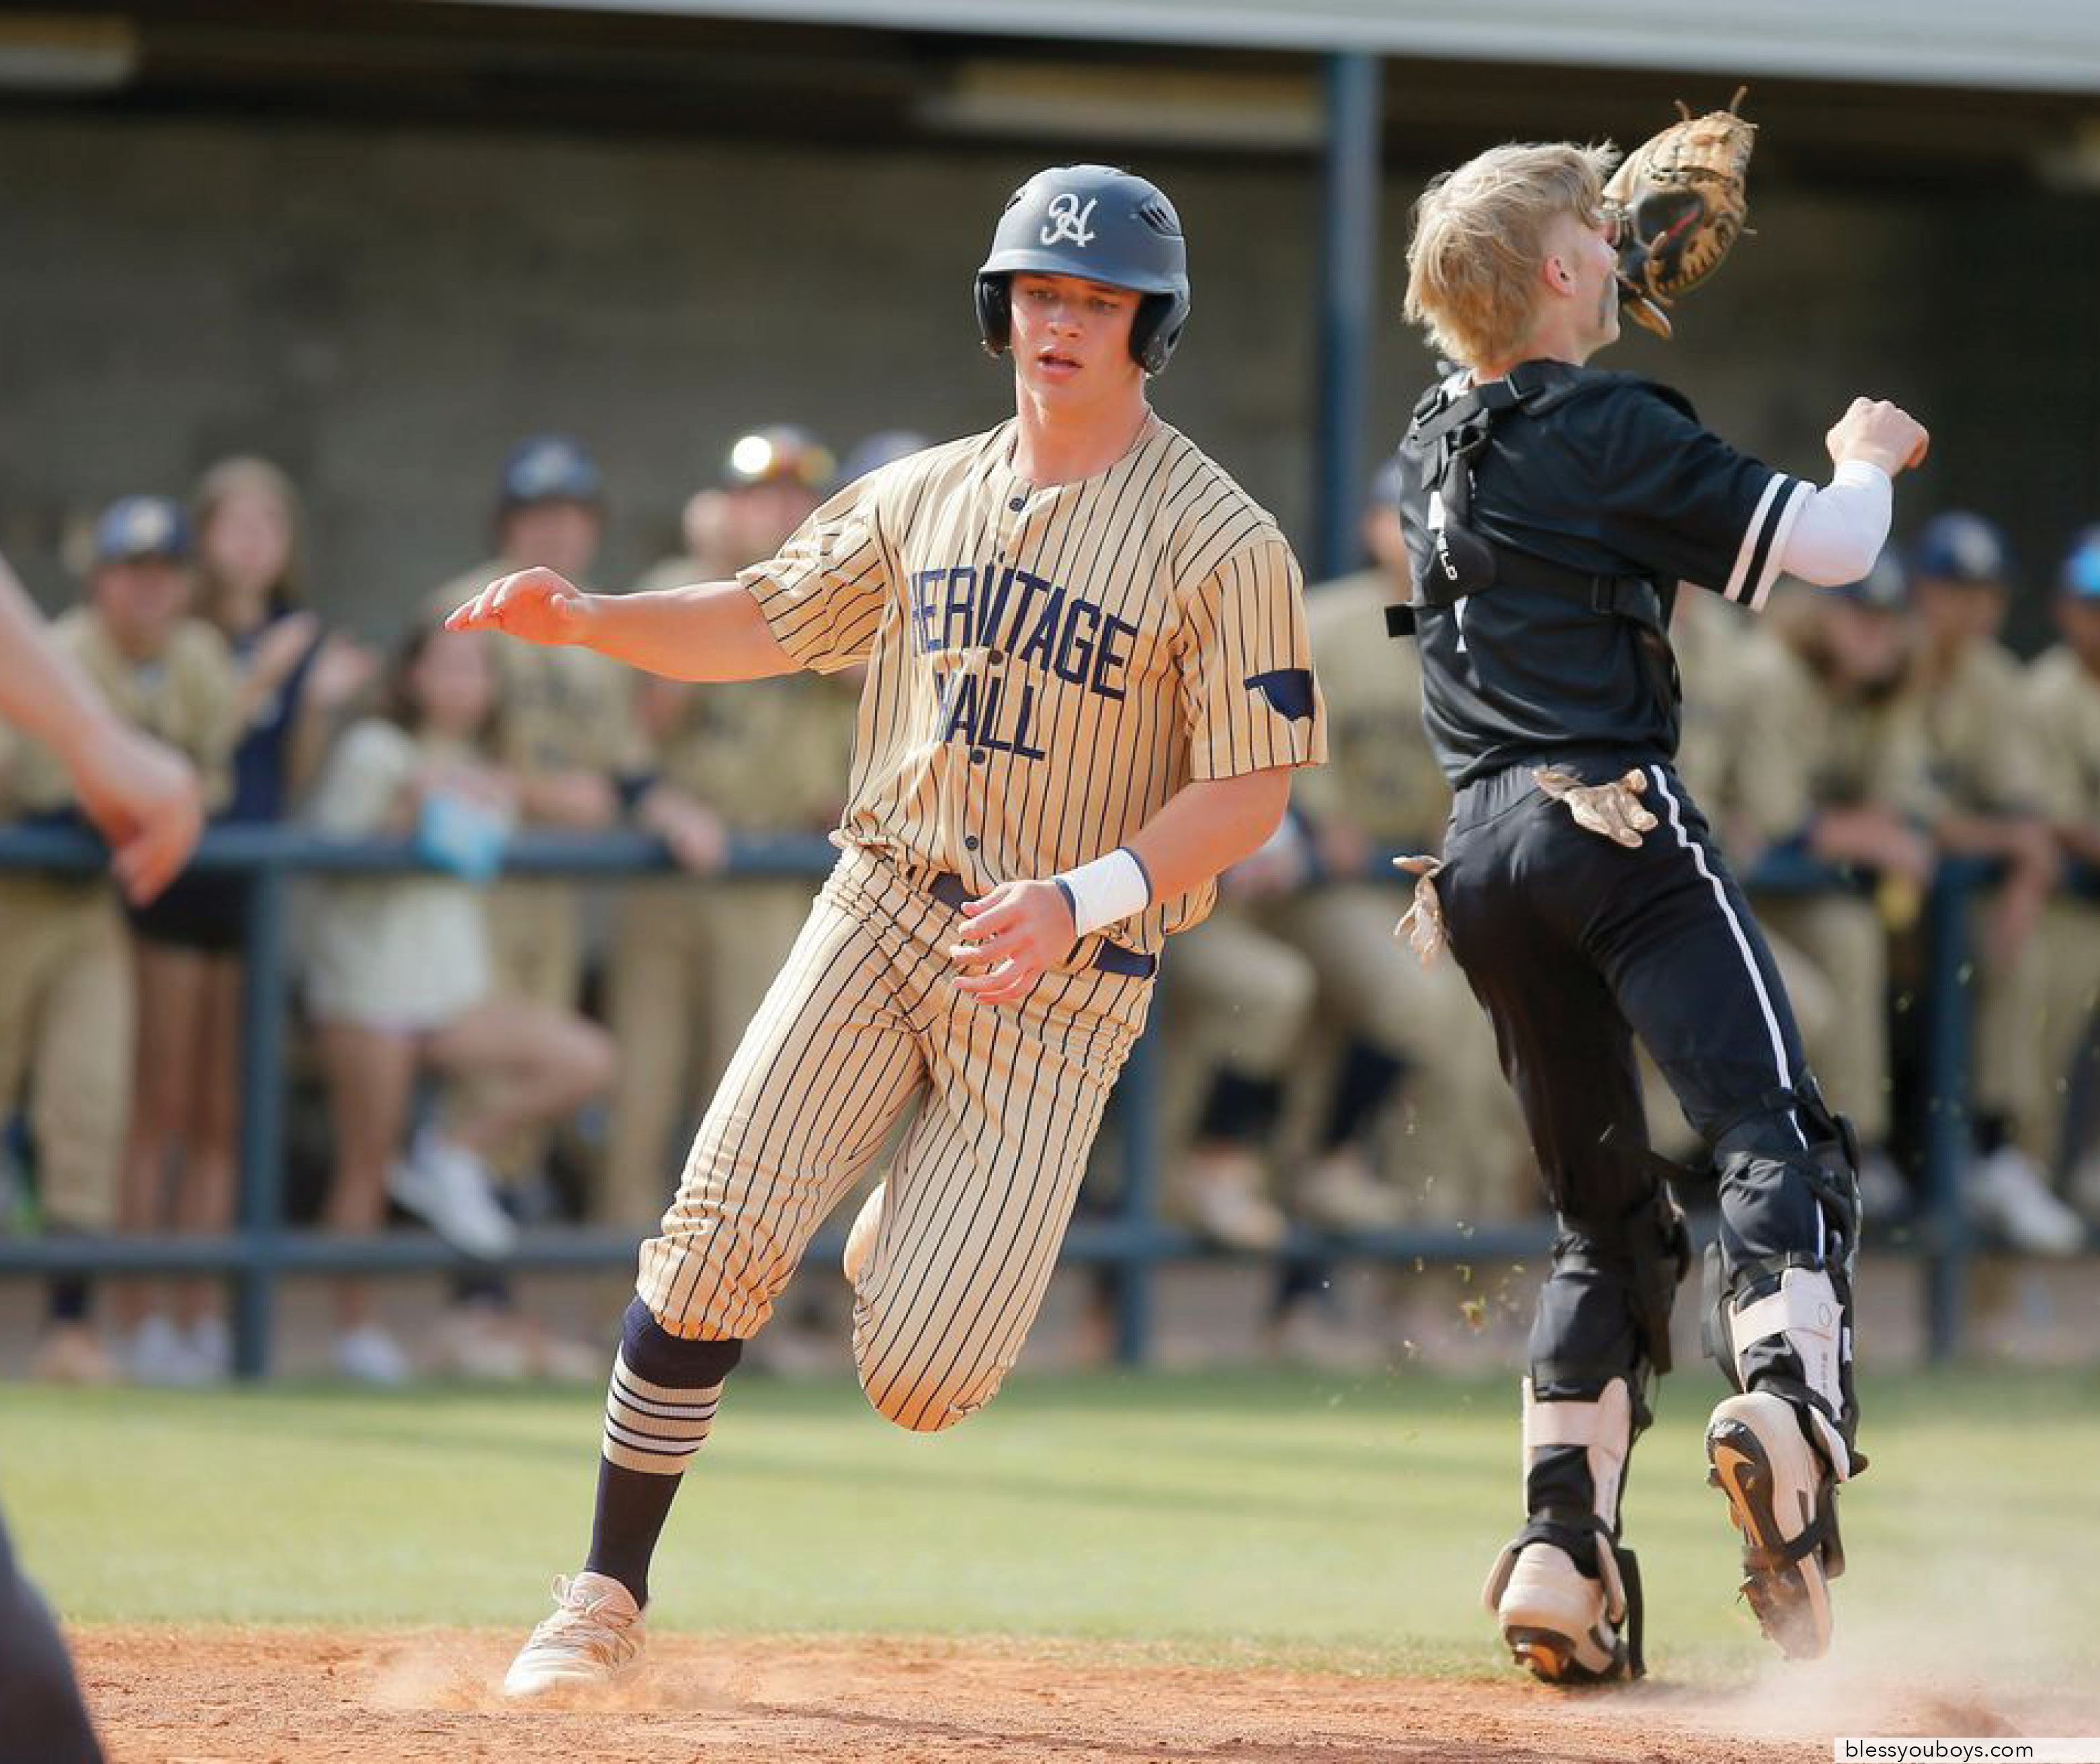 Class of 2022 Outfield Talent has Potential to be Special - ITG Next